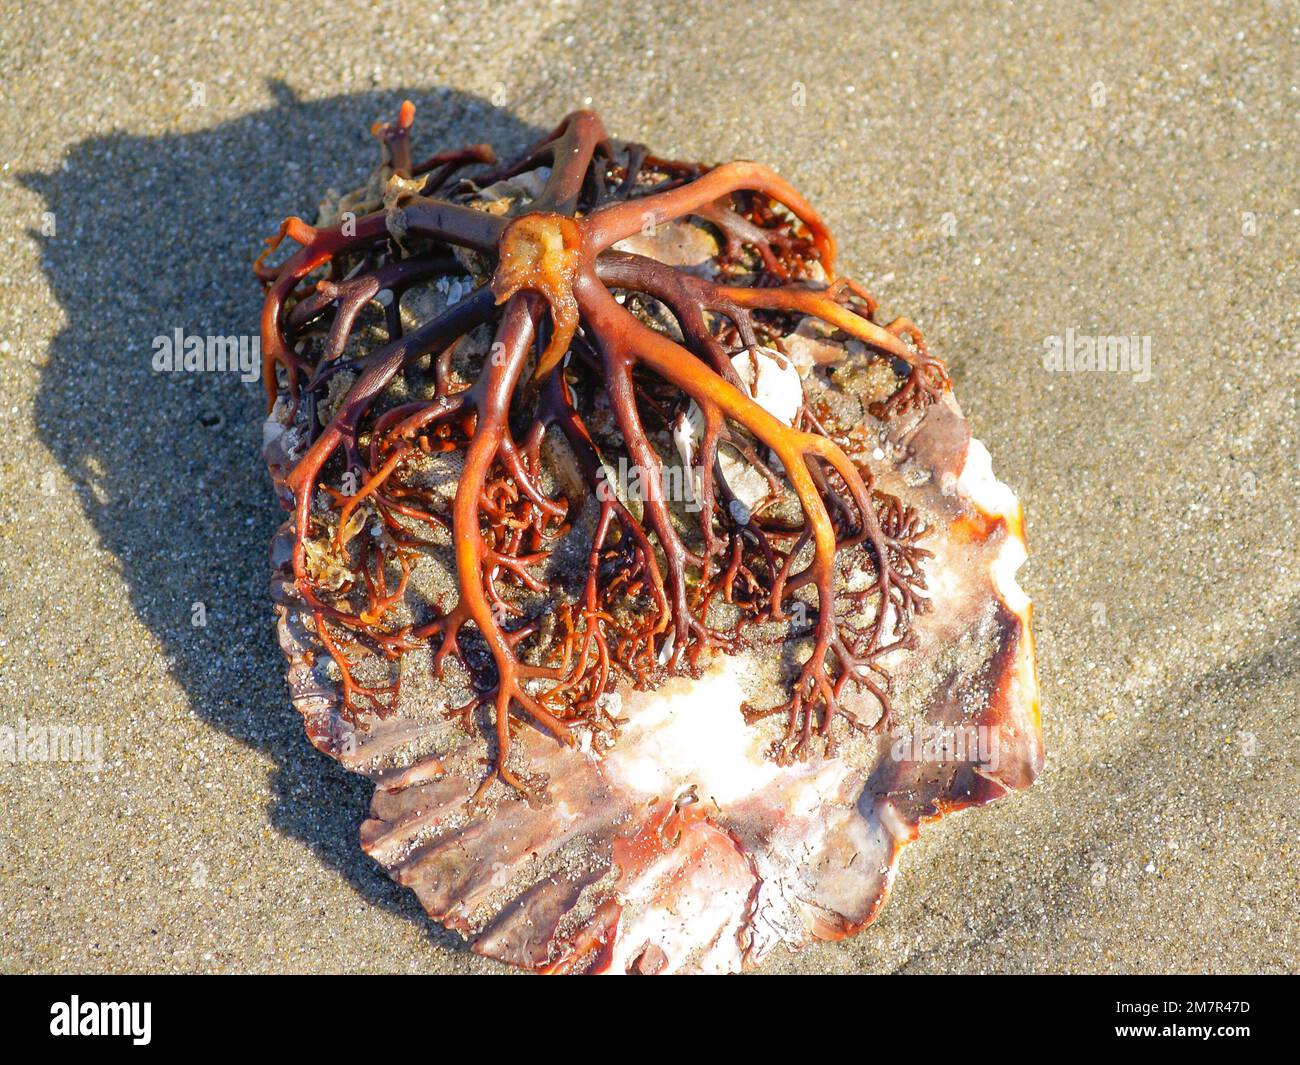 Foot of holdfast of giant kelp fixed to scallop shell washed up on beach. Stock Photo